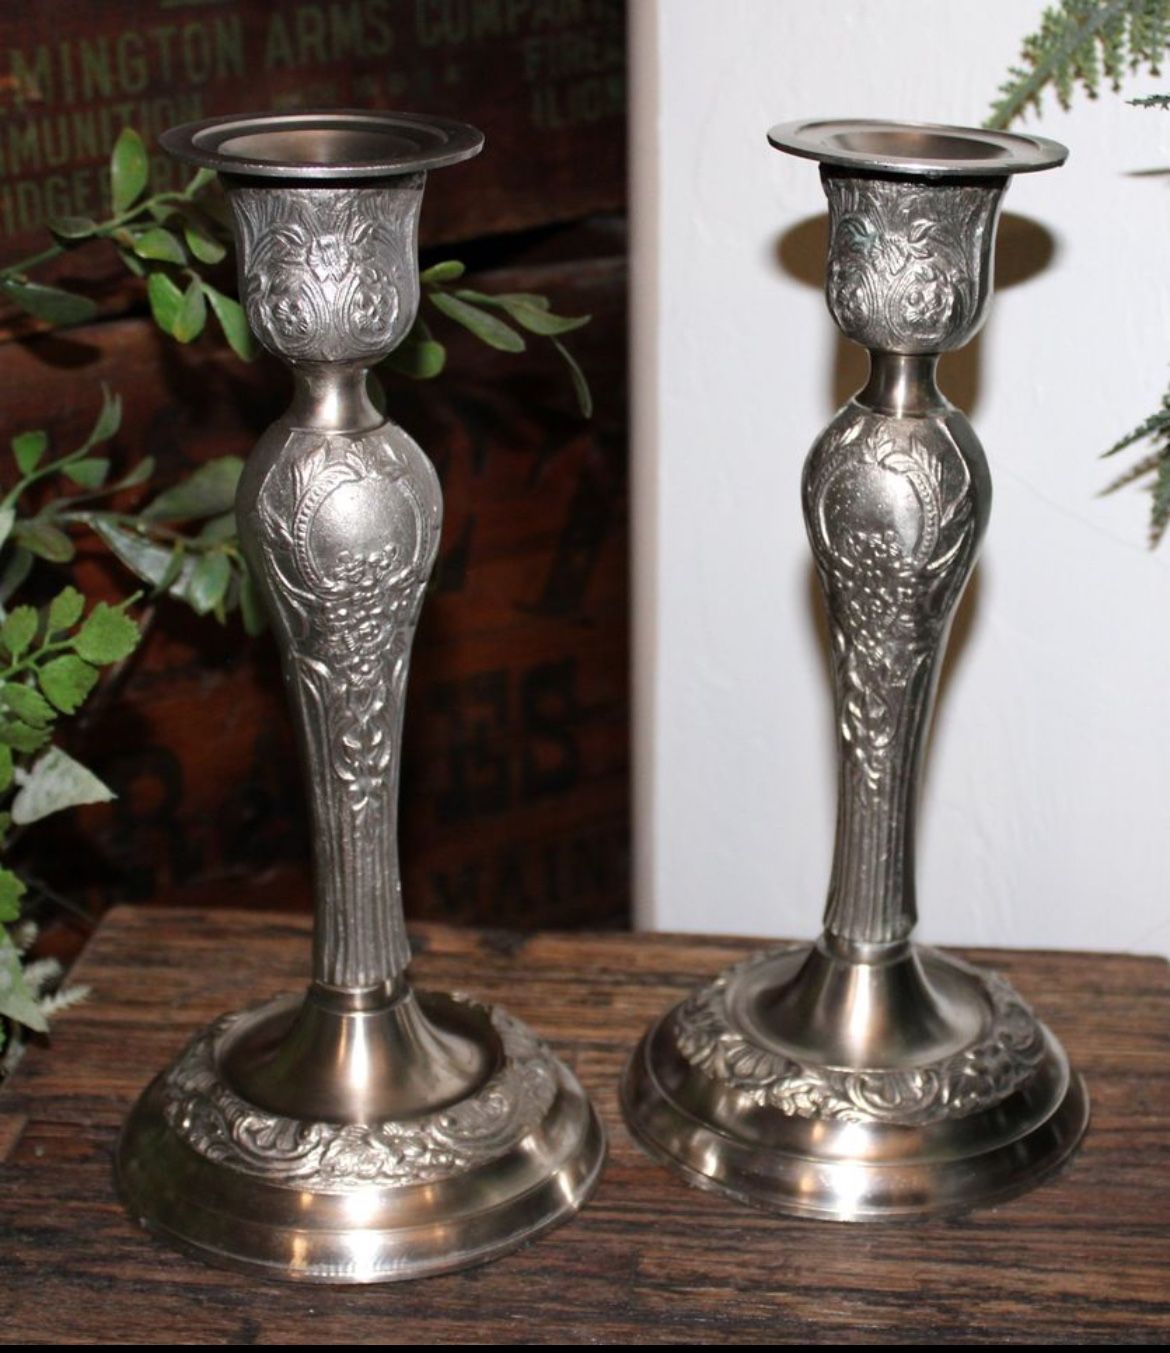 Ornate Vintage Shabby Chic Pewter Candle Holders Candlesticks